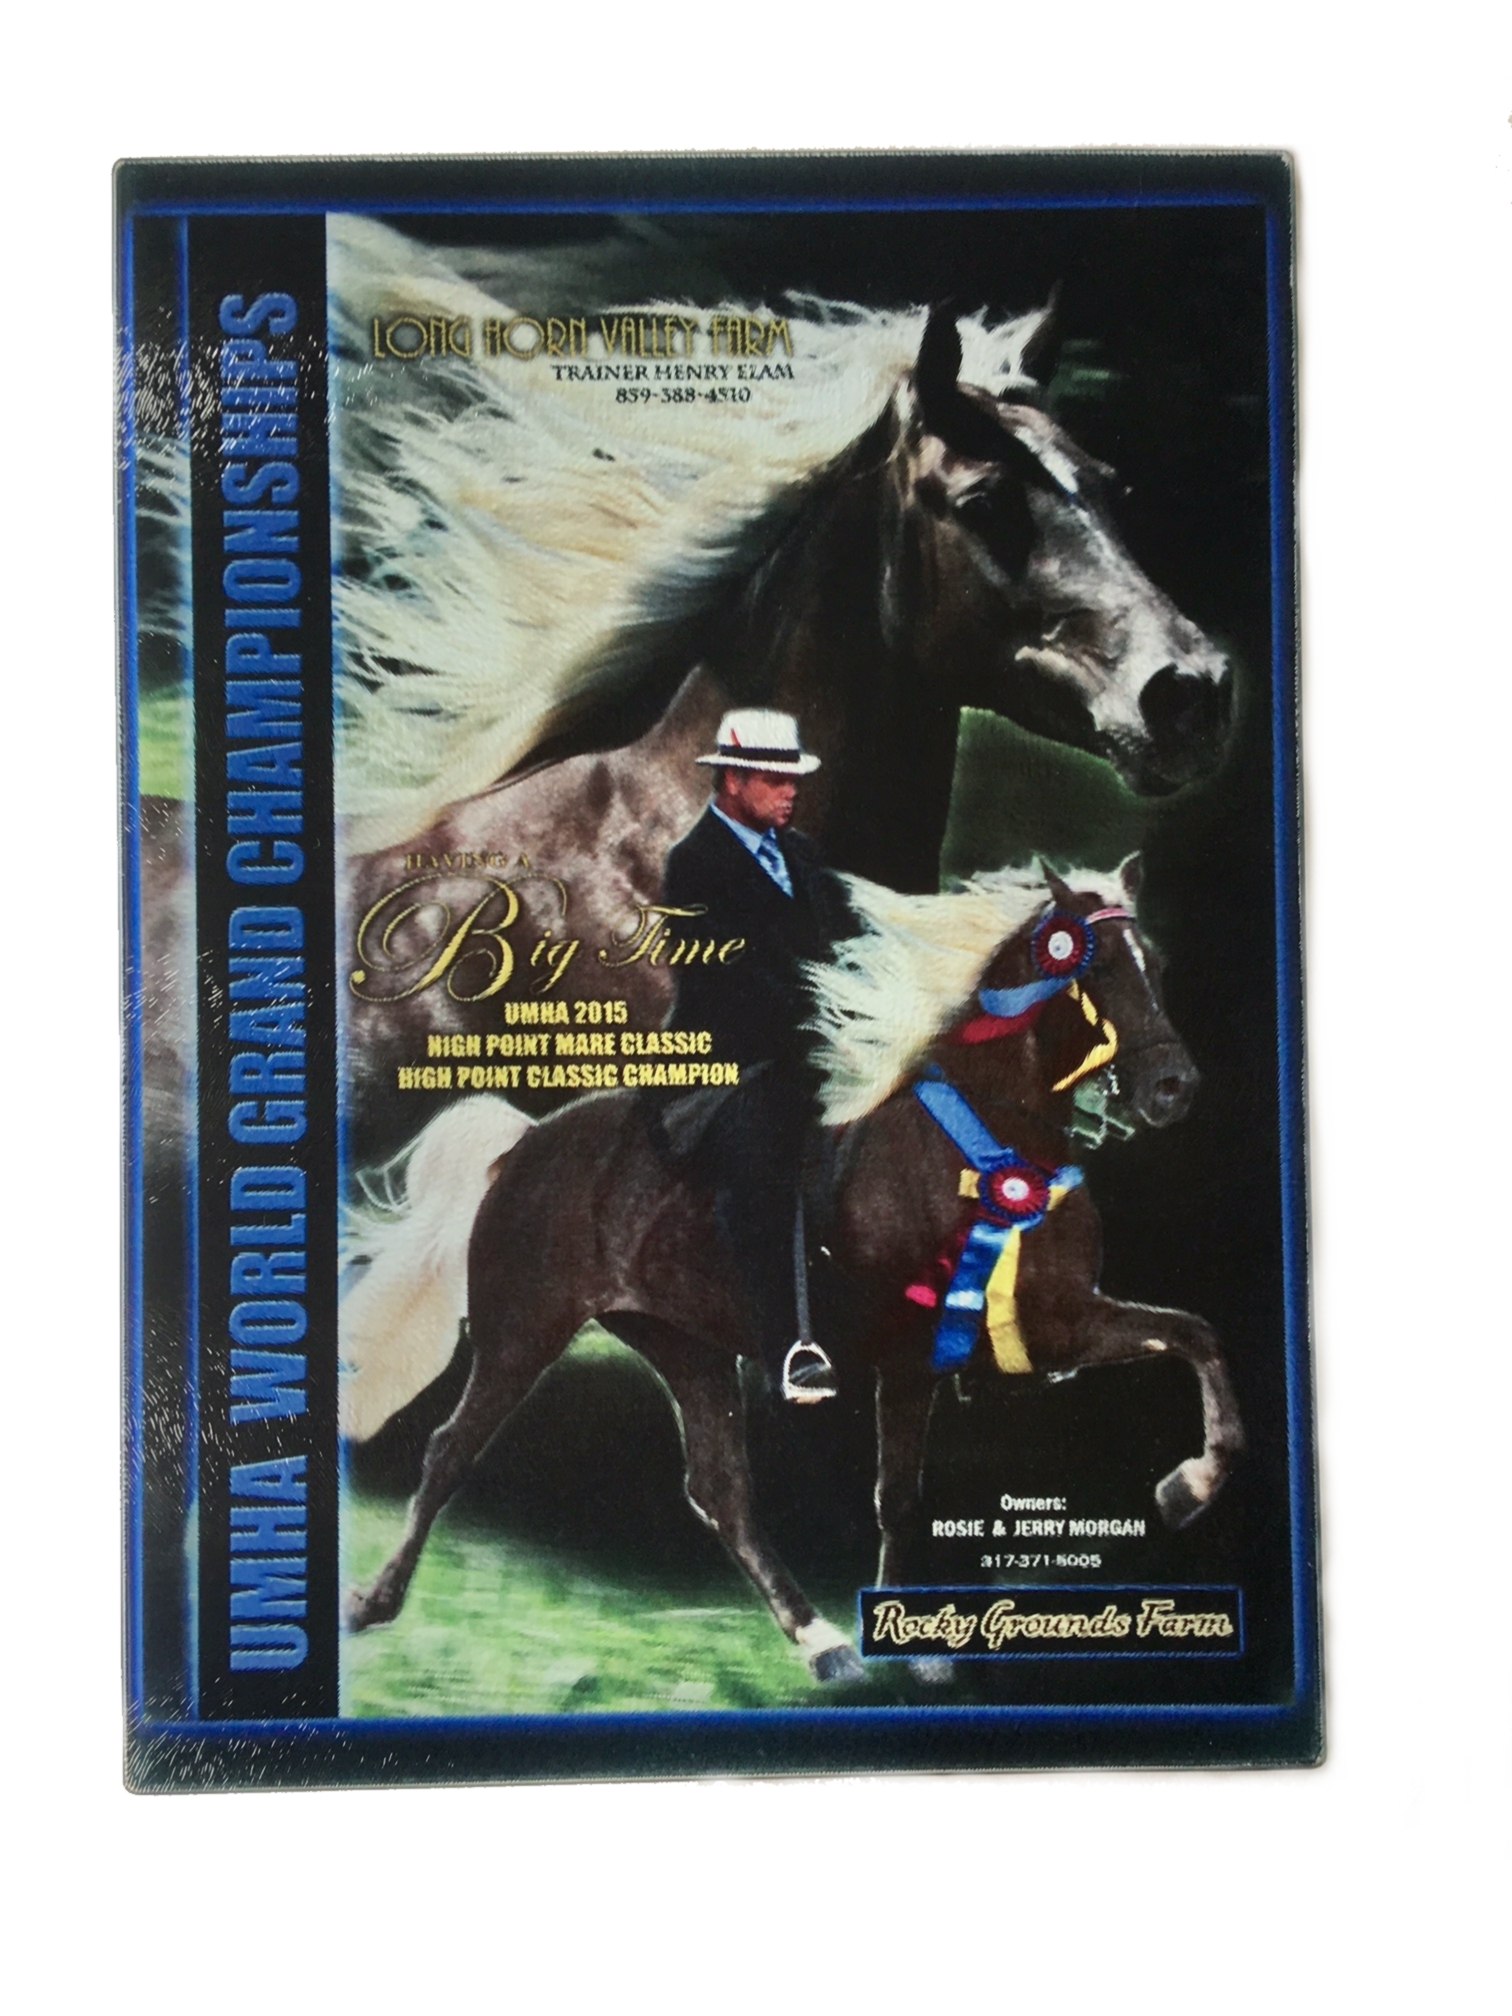 World Champion Rocky Mountain Horse Birthday Cutting Board made with sublimation printing